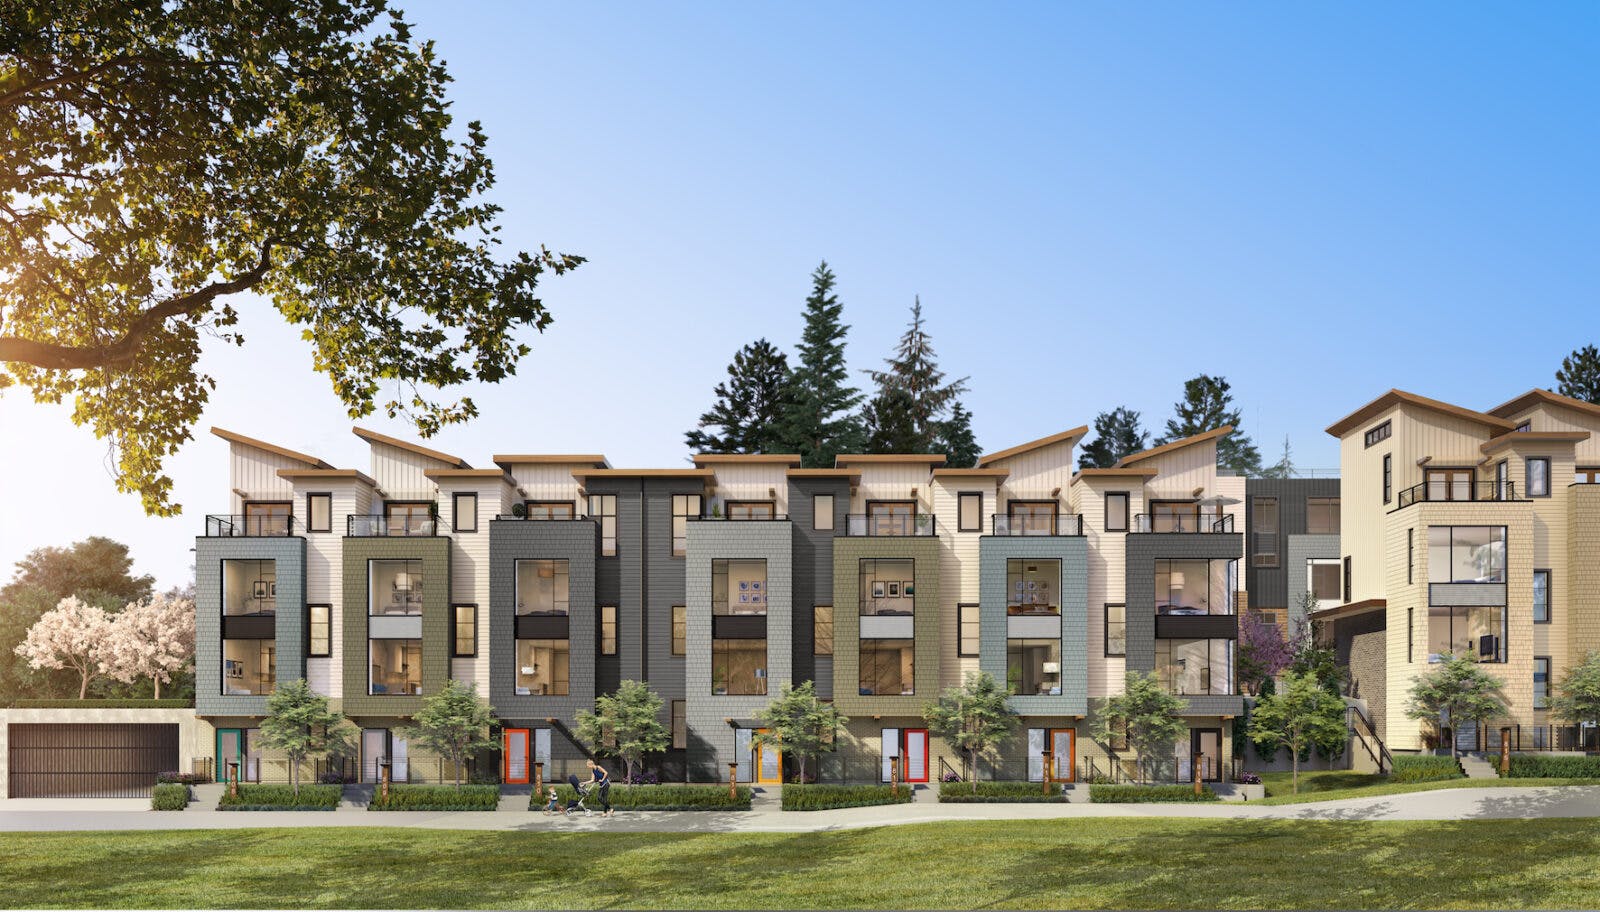 Architectural rendering of The Trails community, showcasing the contemporary Craftsman-style homes with sustainable design in North Vancouver's Moodyville neighborhood